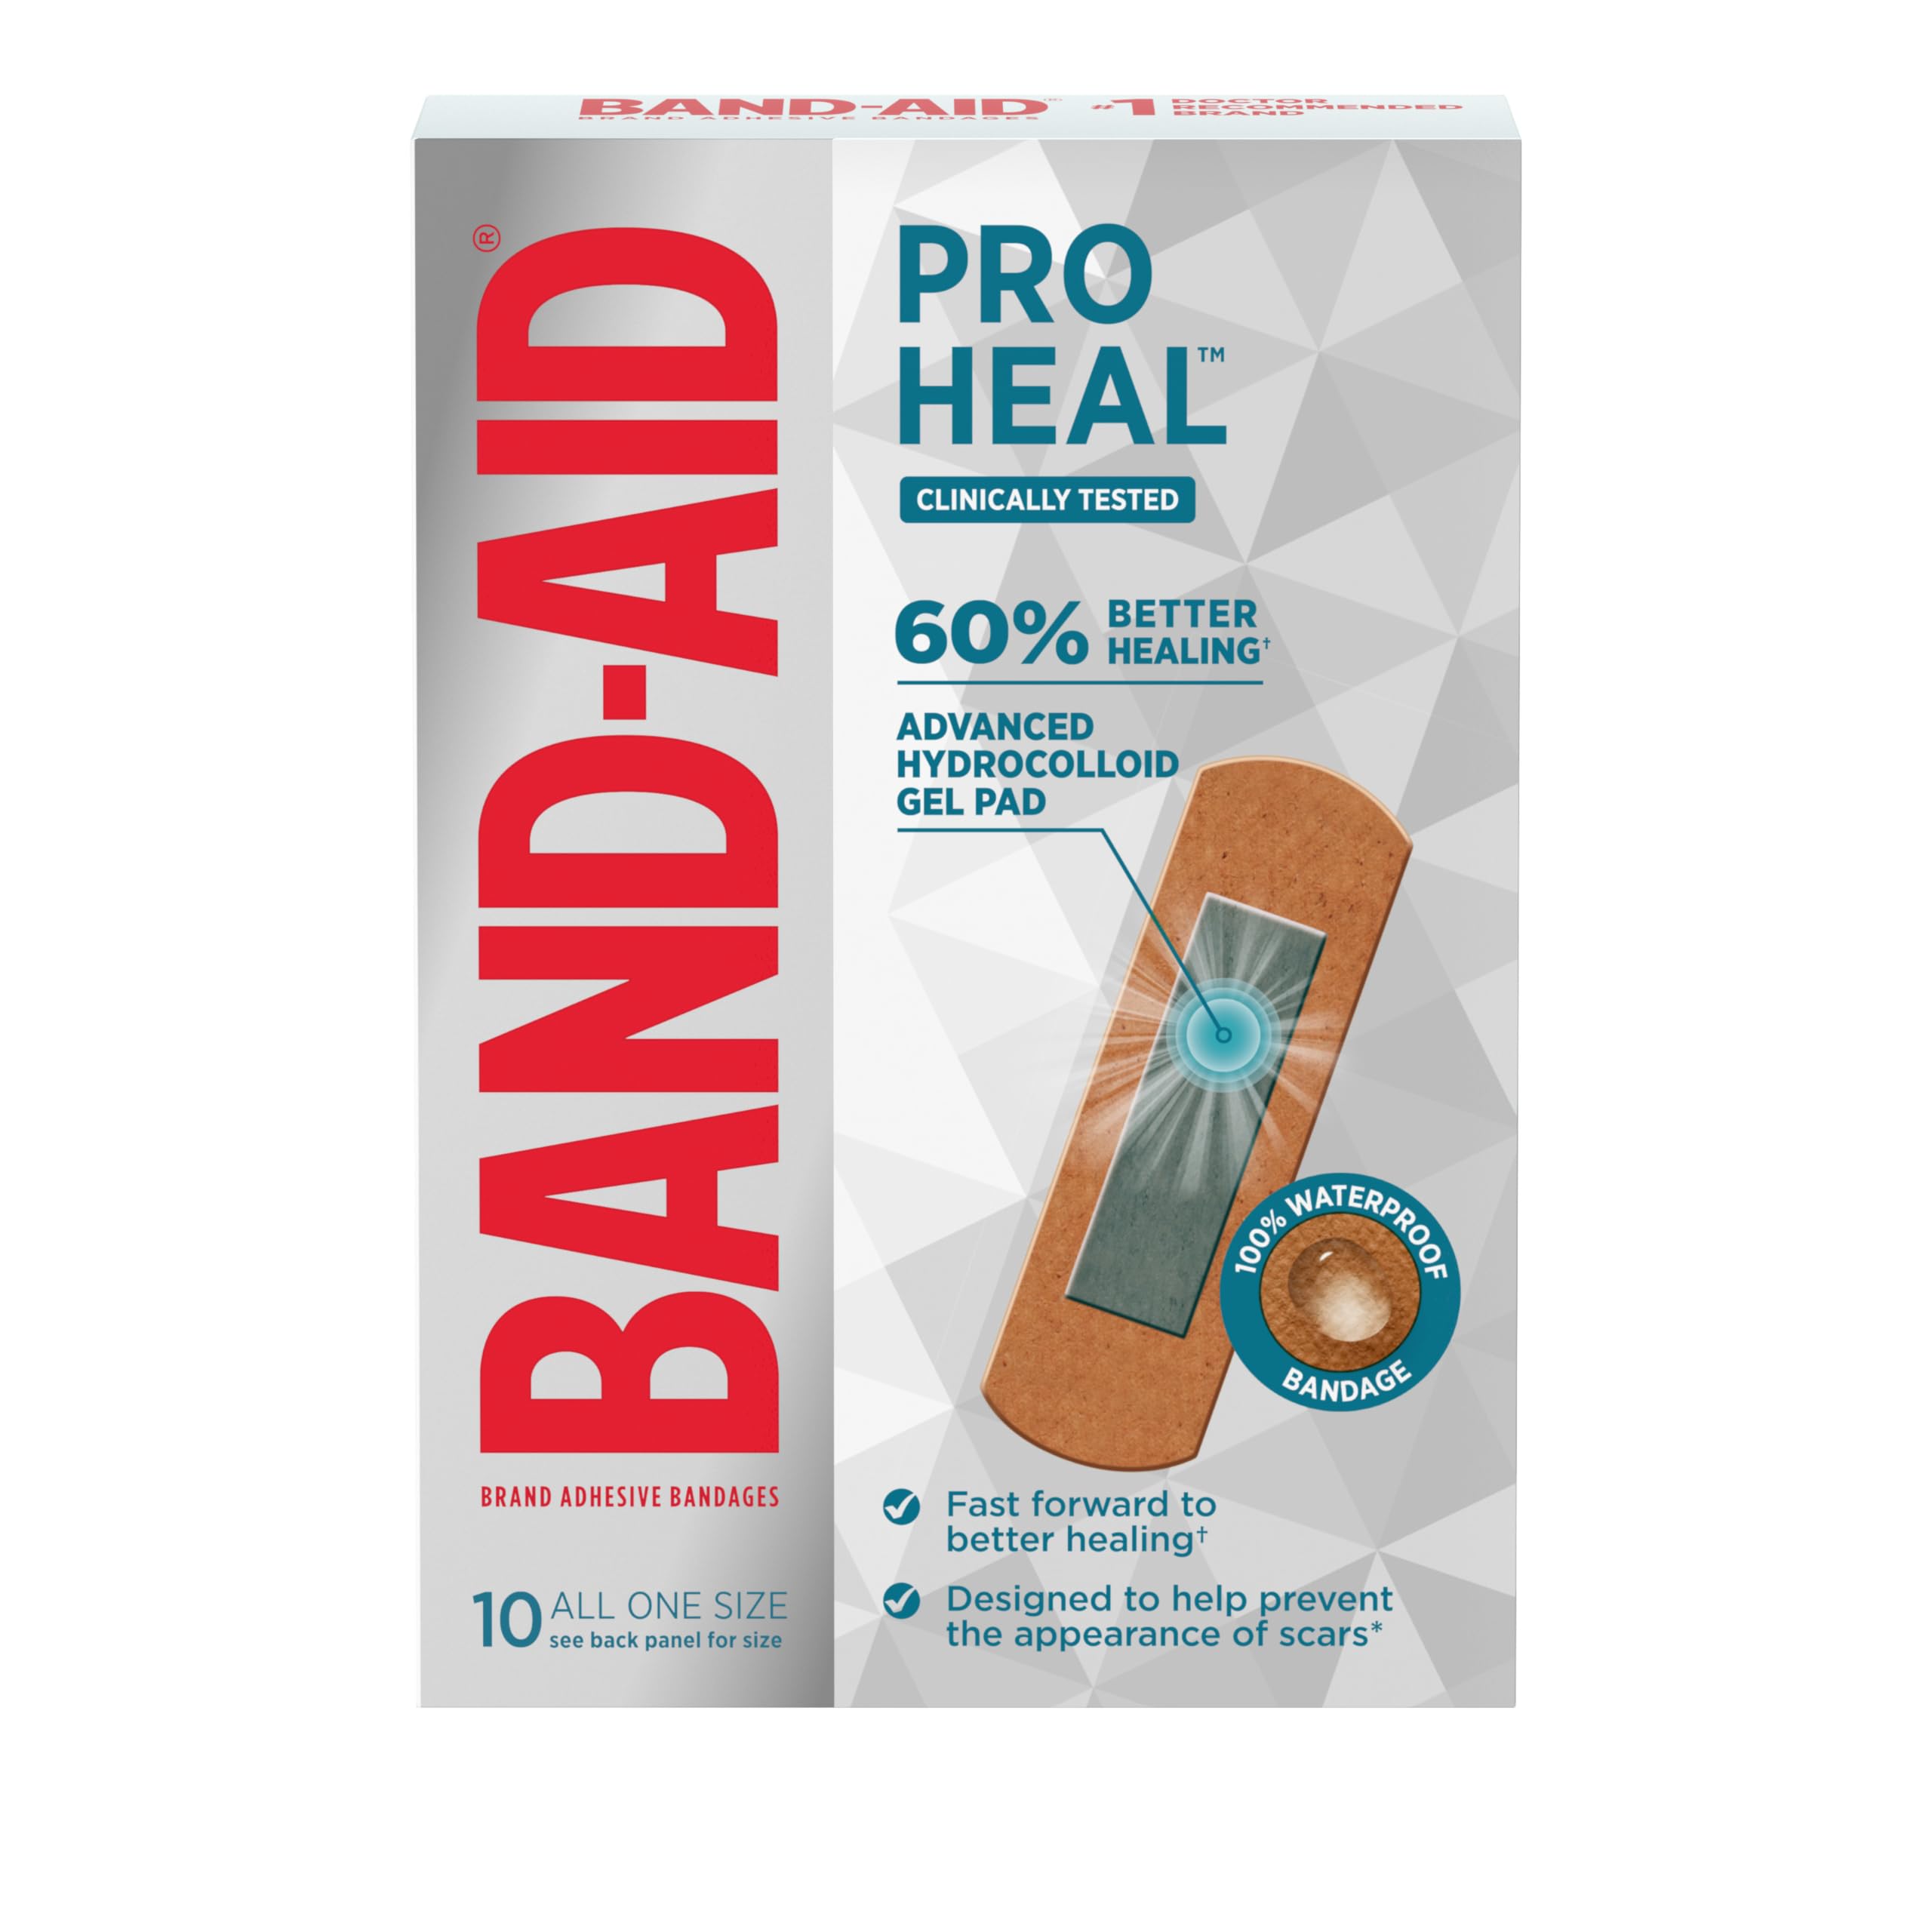 Band-Aid Brand Pro Heal Adhesive Bandages with Hydrocolloid Gel Pad, Clinically Tested Waterproof Bandages, Better Healing of Minor Wounds, Sterile First Aid Bandages, All One Size, 10 ct